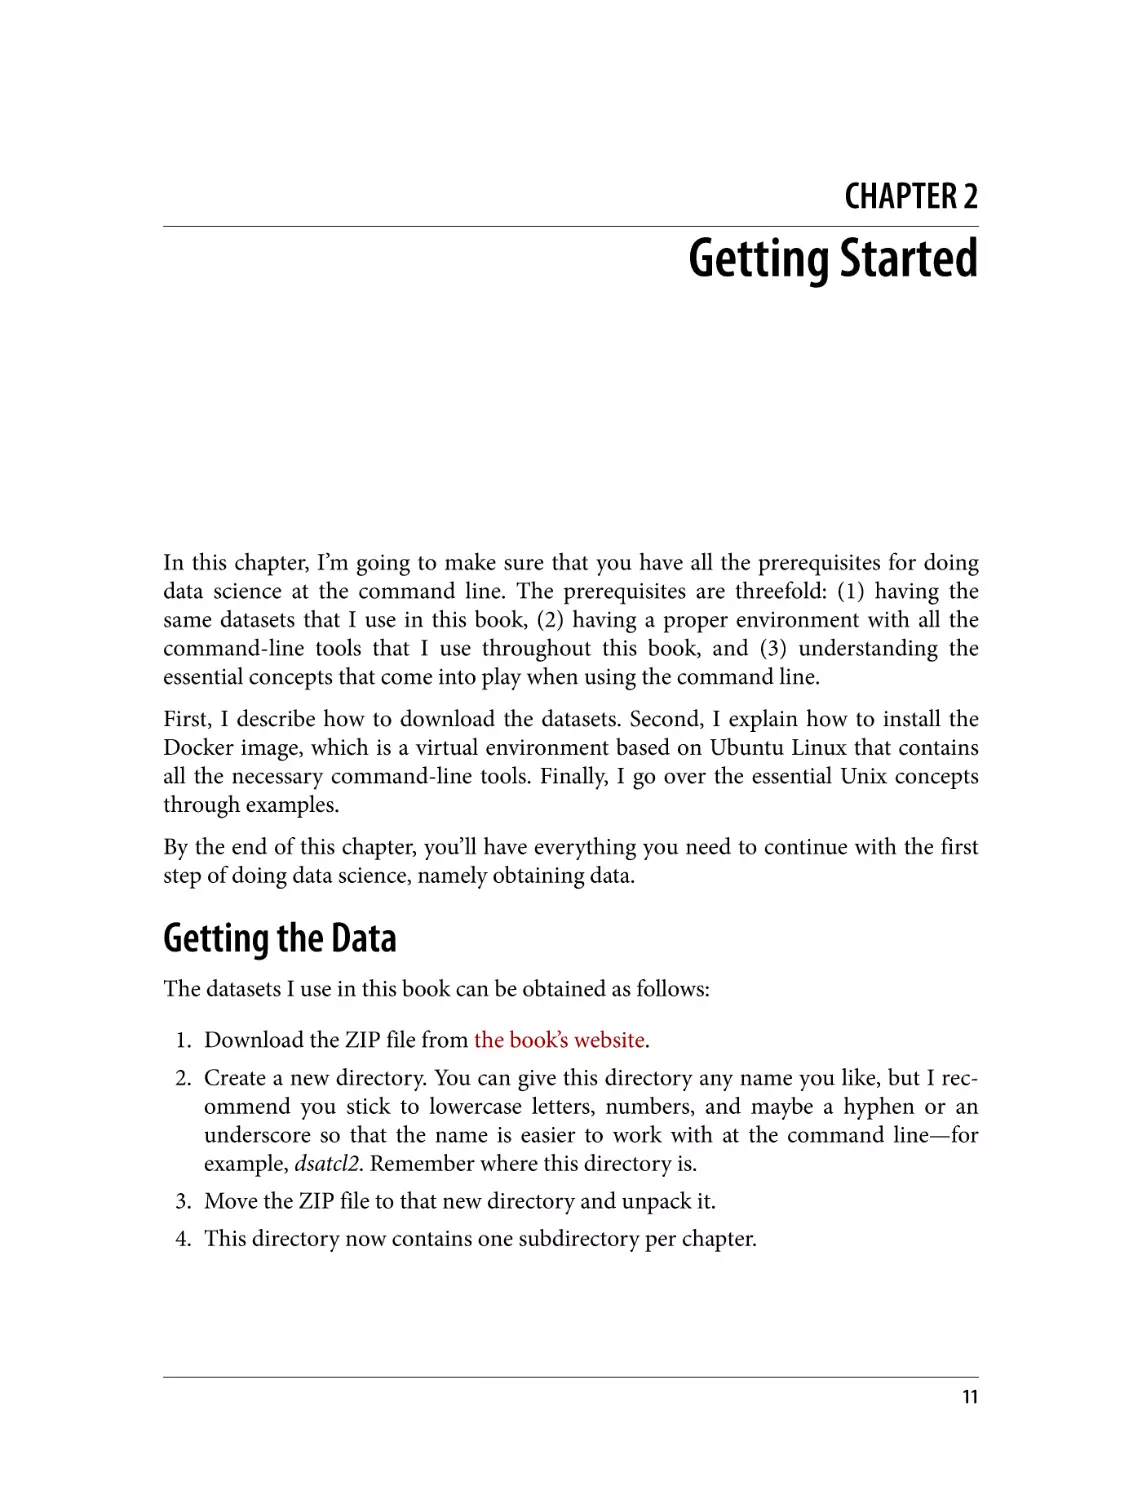 Chapter 2. Getting Started
Getting the Data